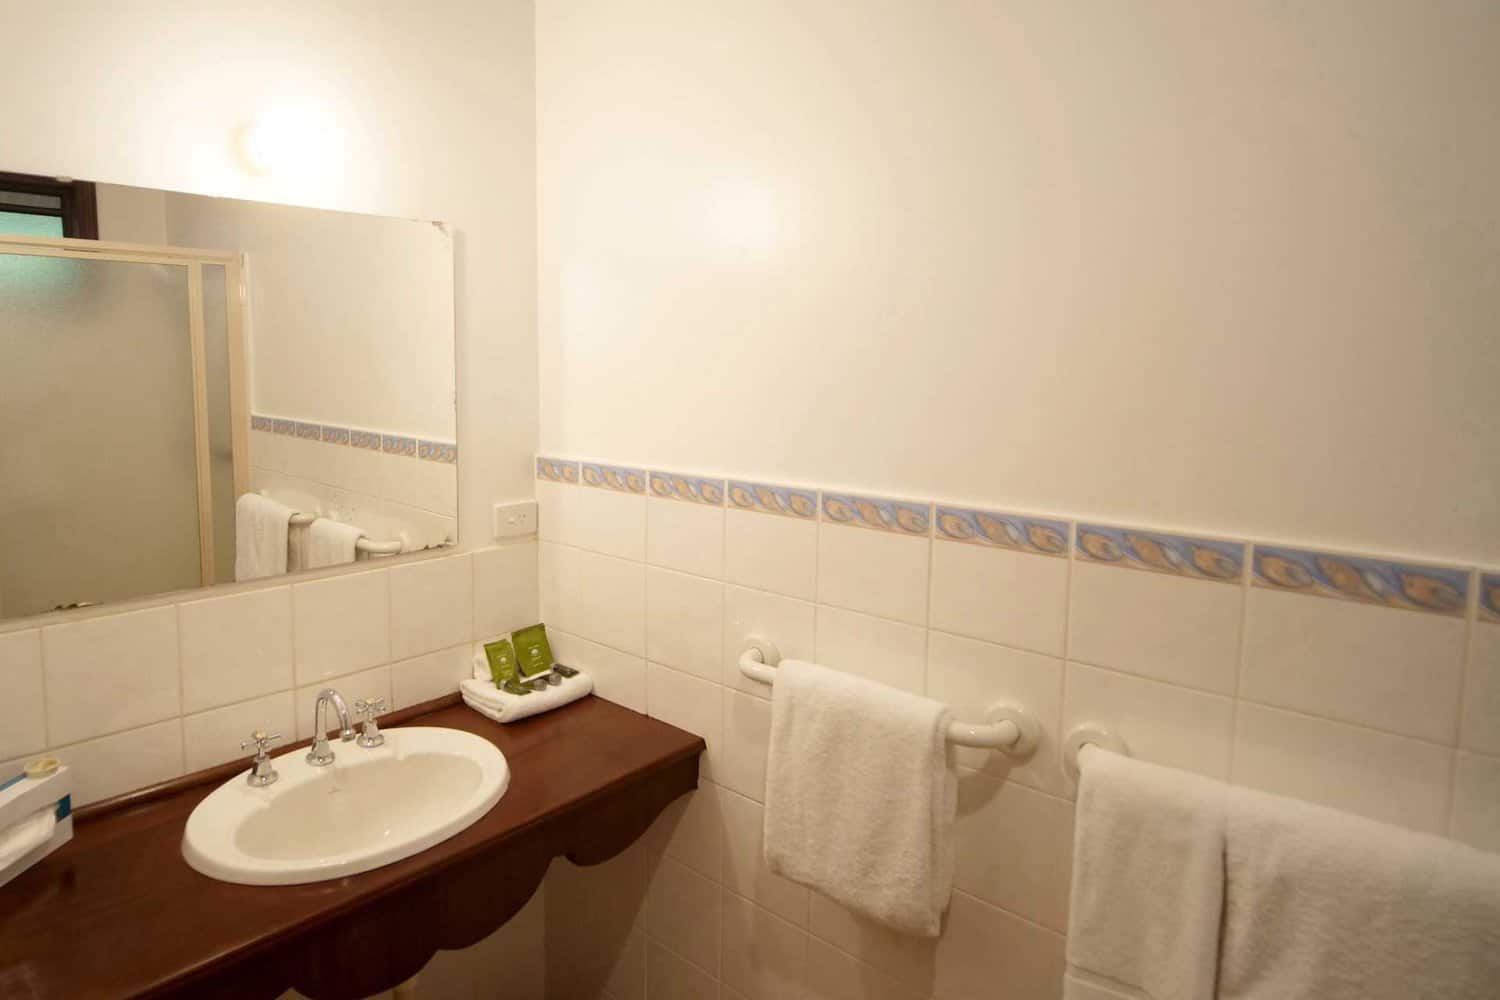 Clean and simple hotel bathroom with a large mirror, white tiled walls featuring a blue tile border, a wooden vanity with a white basin, and fluffy towels ready for use.